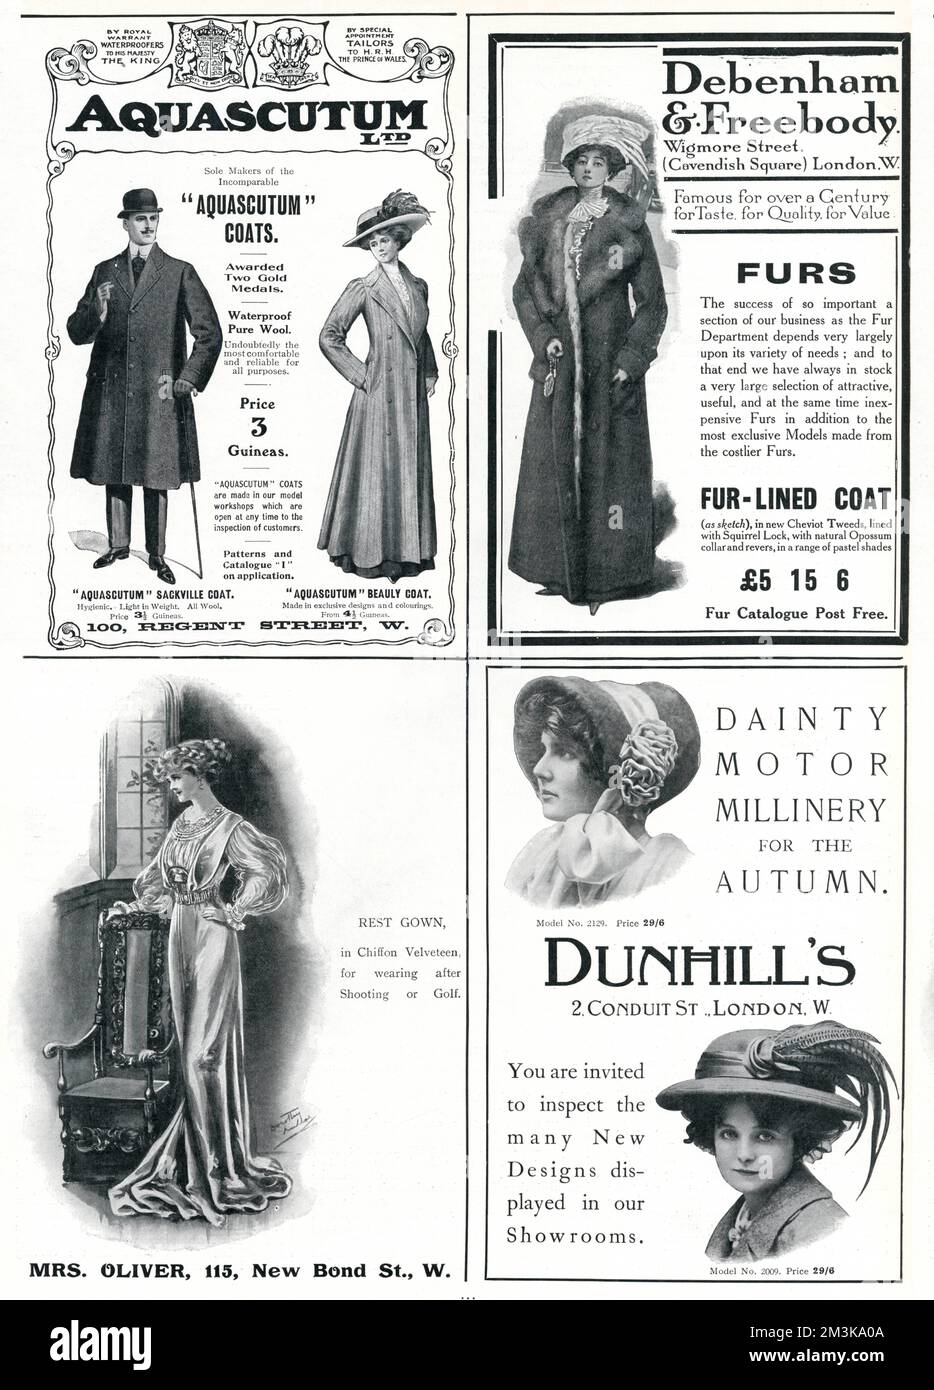 Page of four fashion adverts for clothing, for Autumn, in The Tatler, October 1909. Aquascutum Ltd, waterproof pure wool coats for men and women.  Debenham & Freebody, fur-lined coat with squirrel. Mrs. Oliver, chiffon Velveteen gown. Dunhills, danity motoring hats.       Date: 1909 Stock Photo